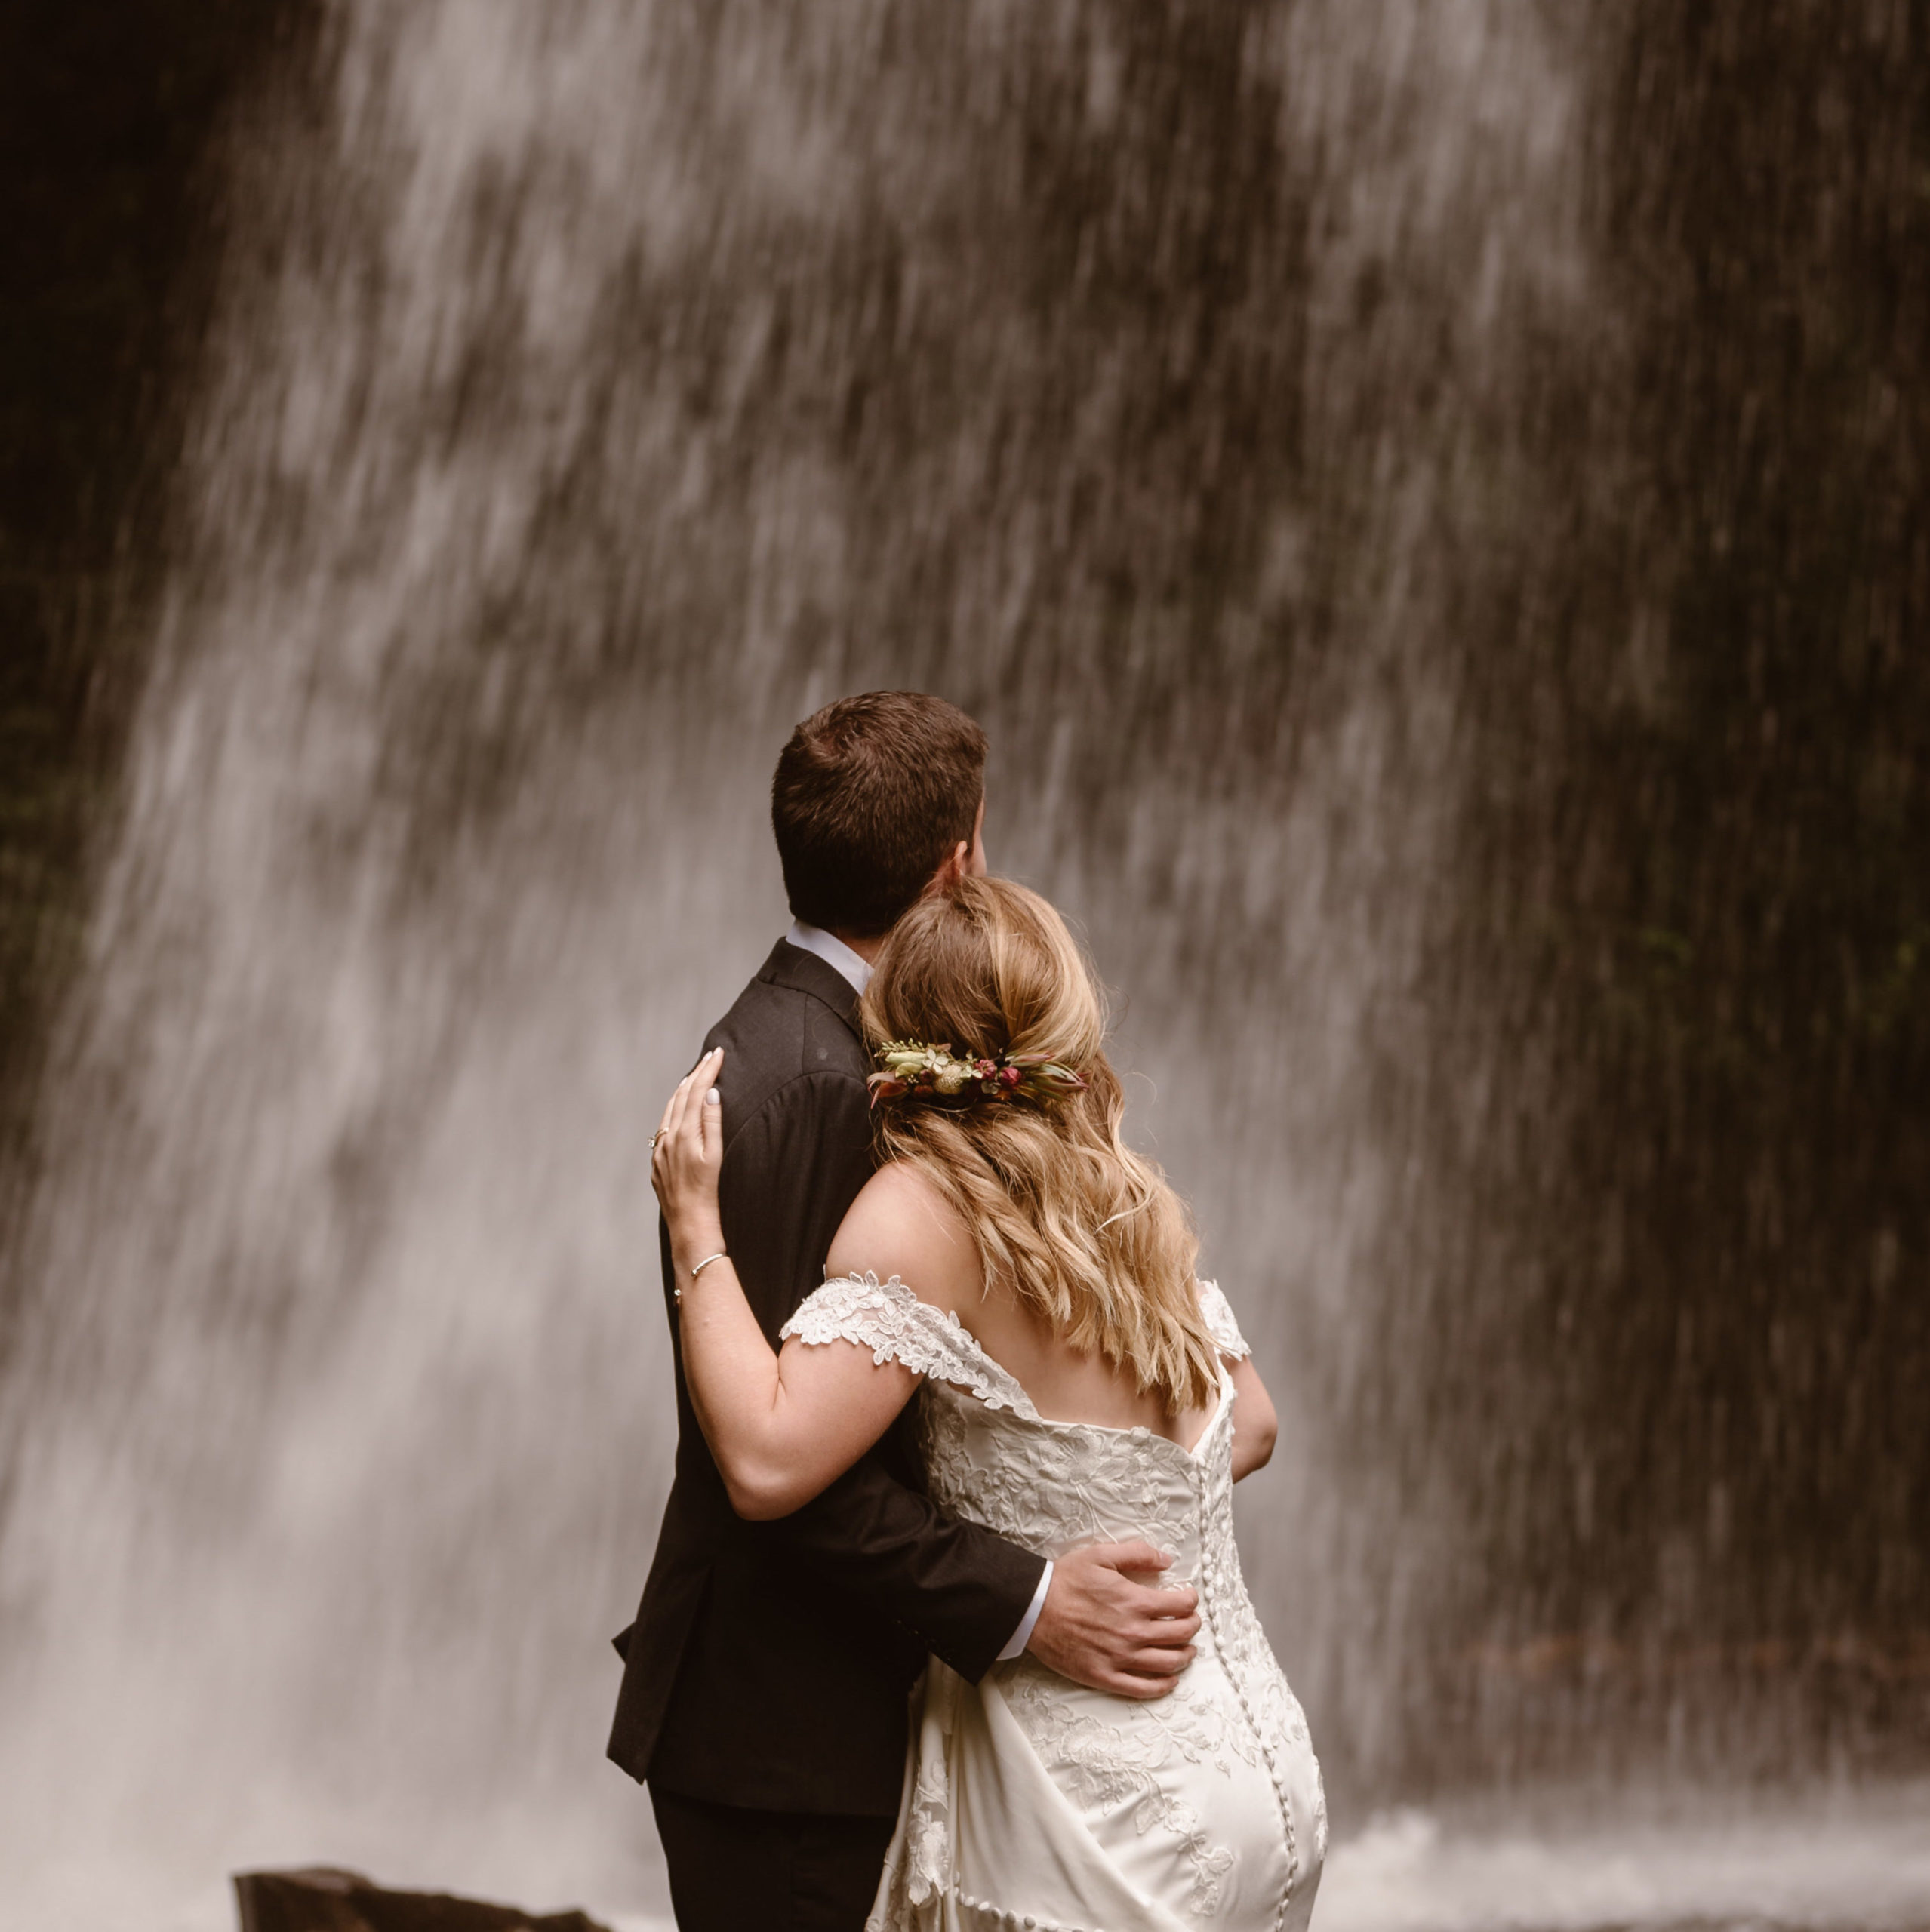 Ashley & Casey say their vows in front of Latorell Falls in Oregon